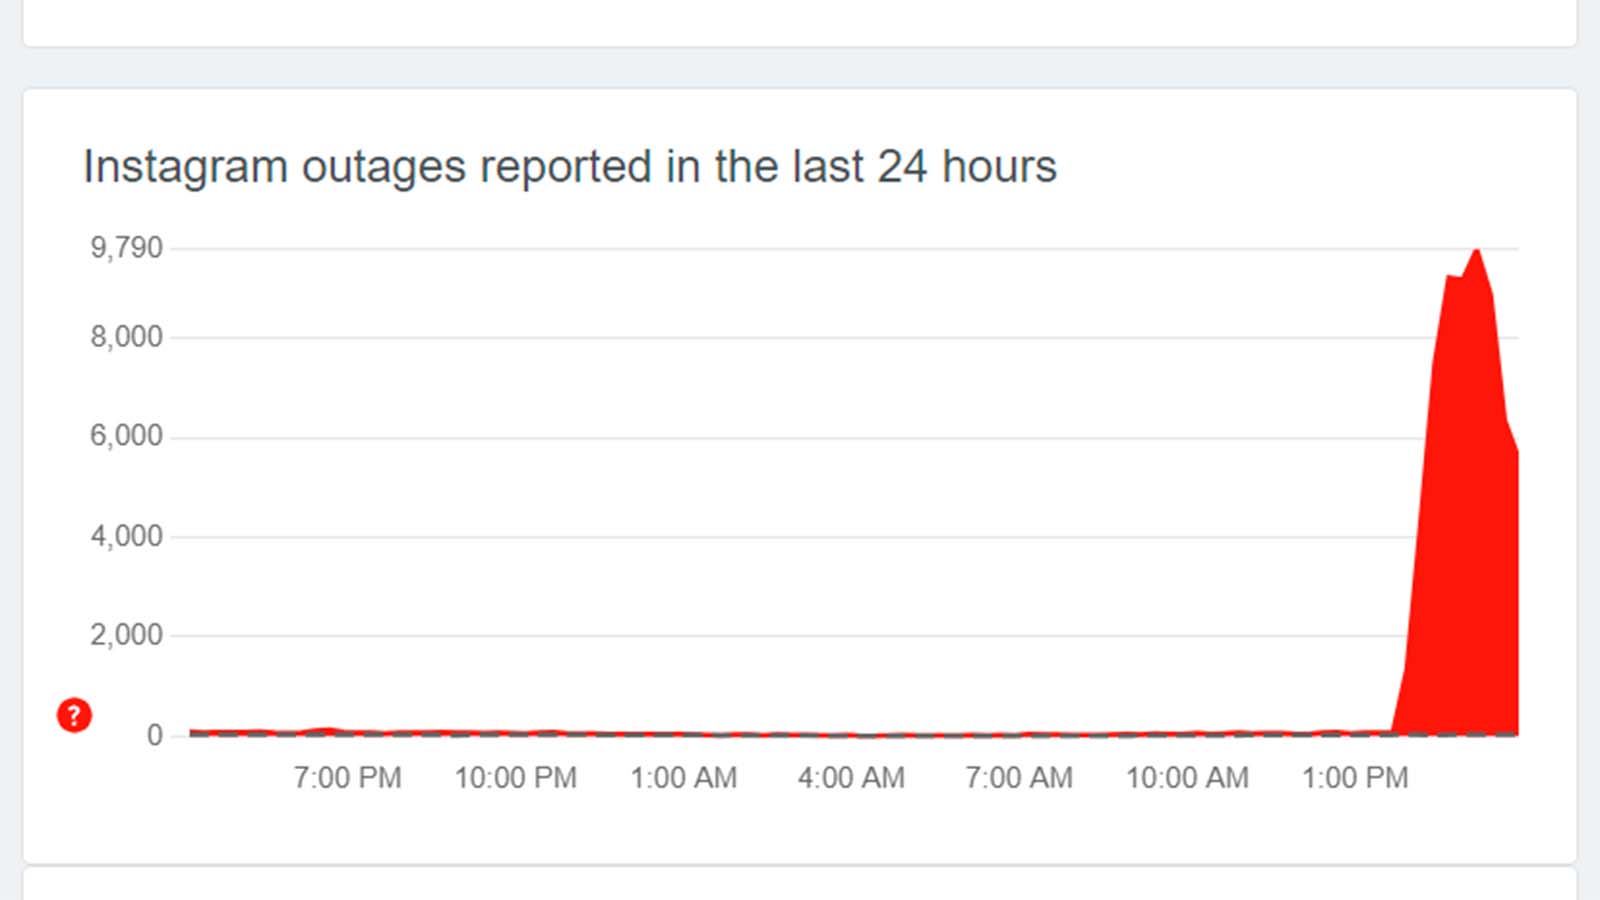 DownDetector graph showing a spike in outage reports for Facebook's services in the US